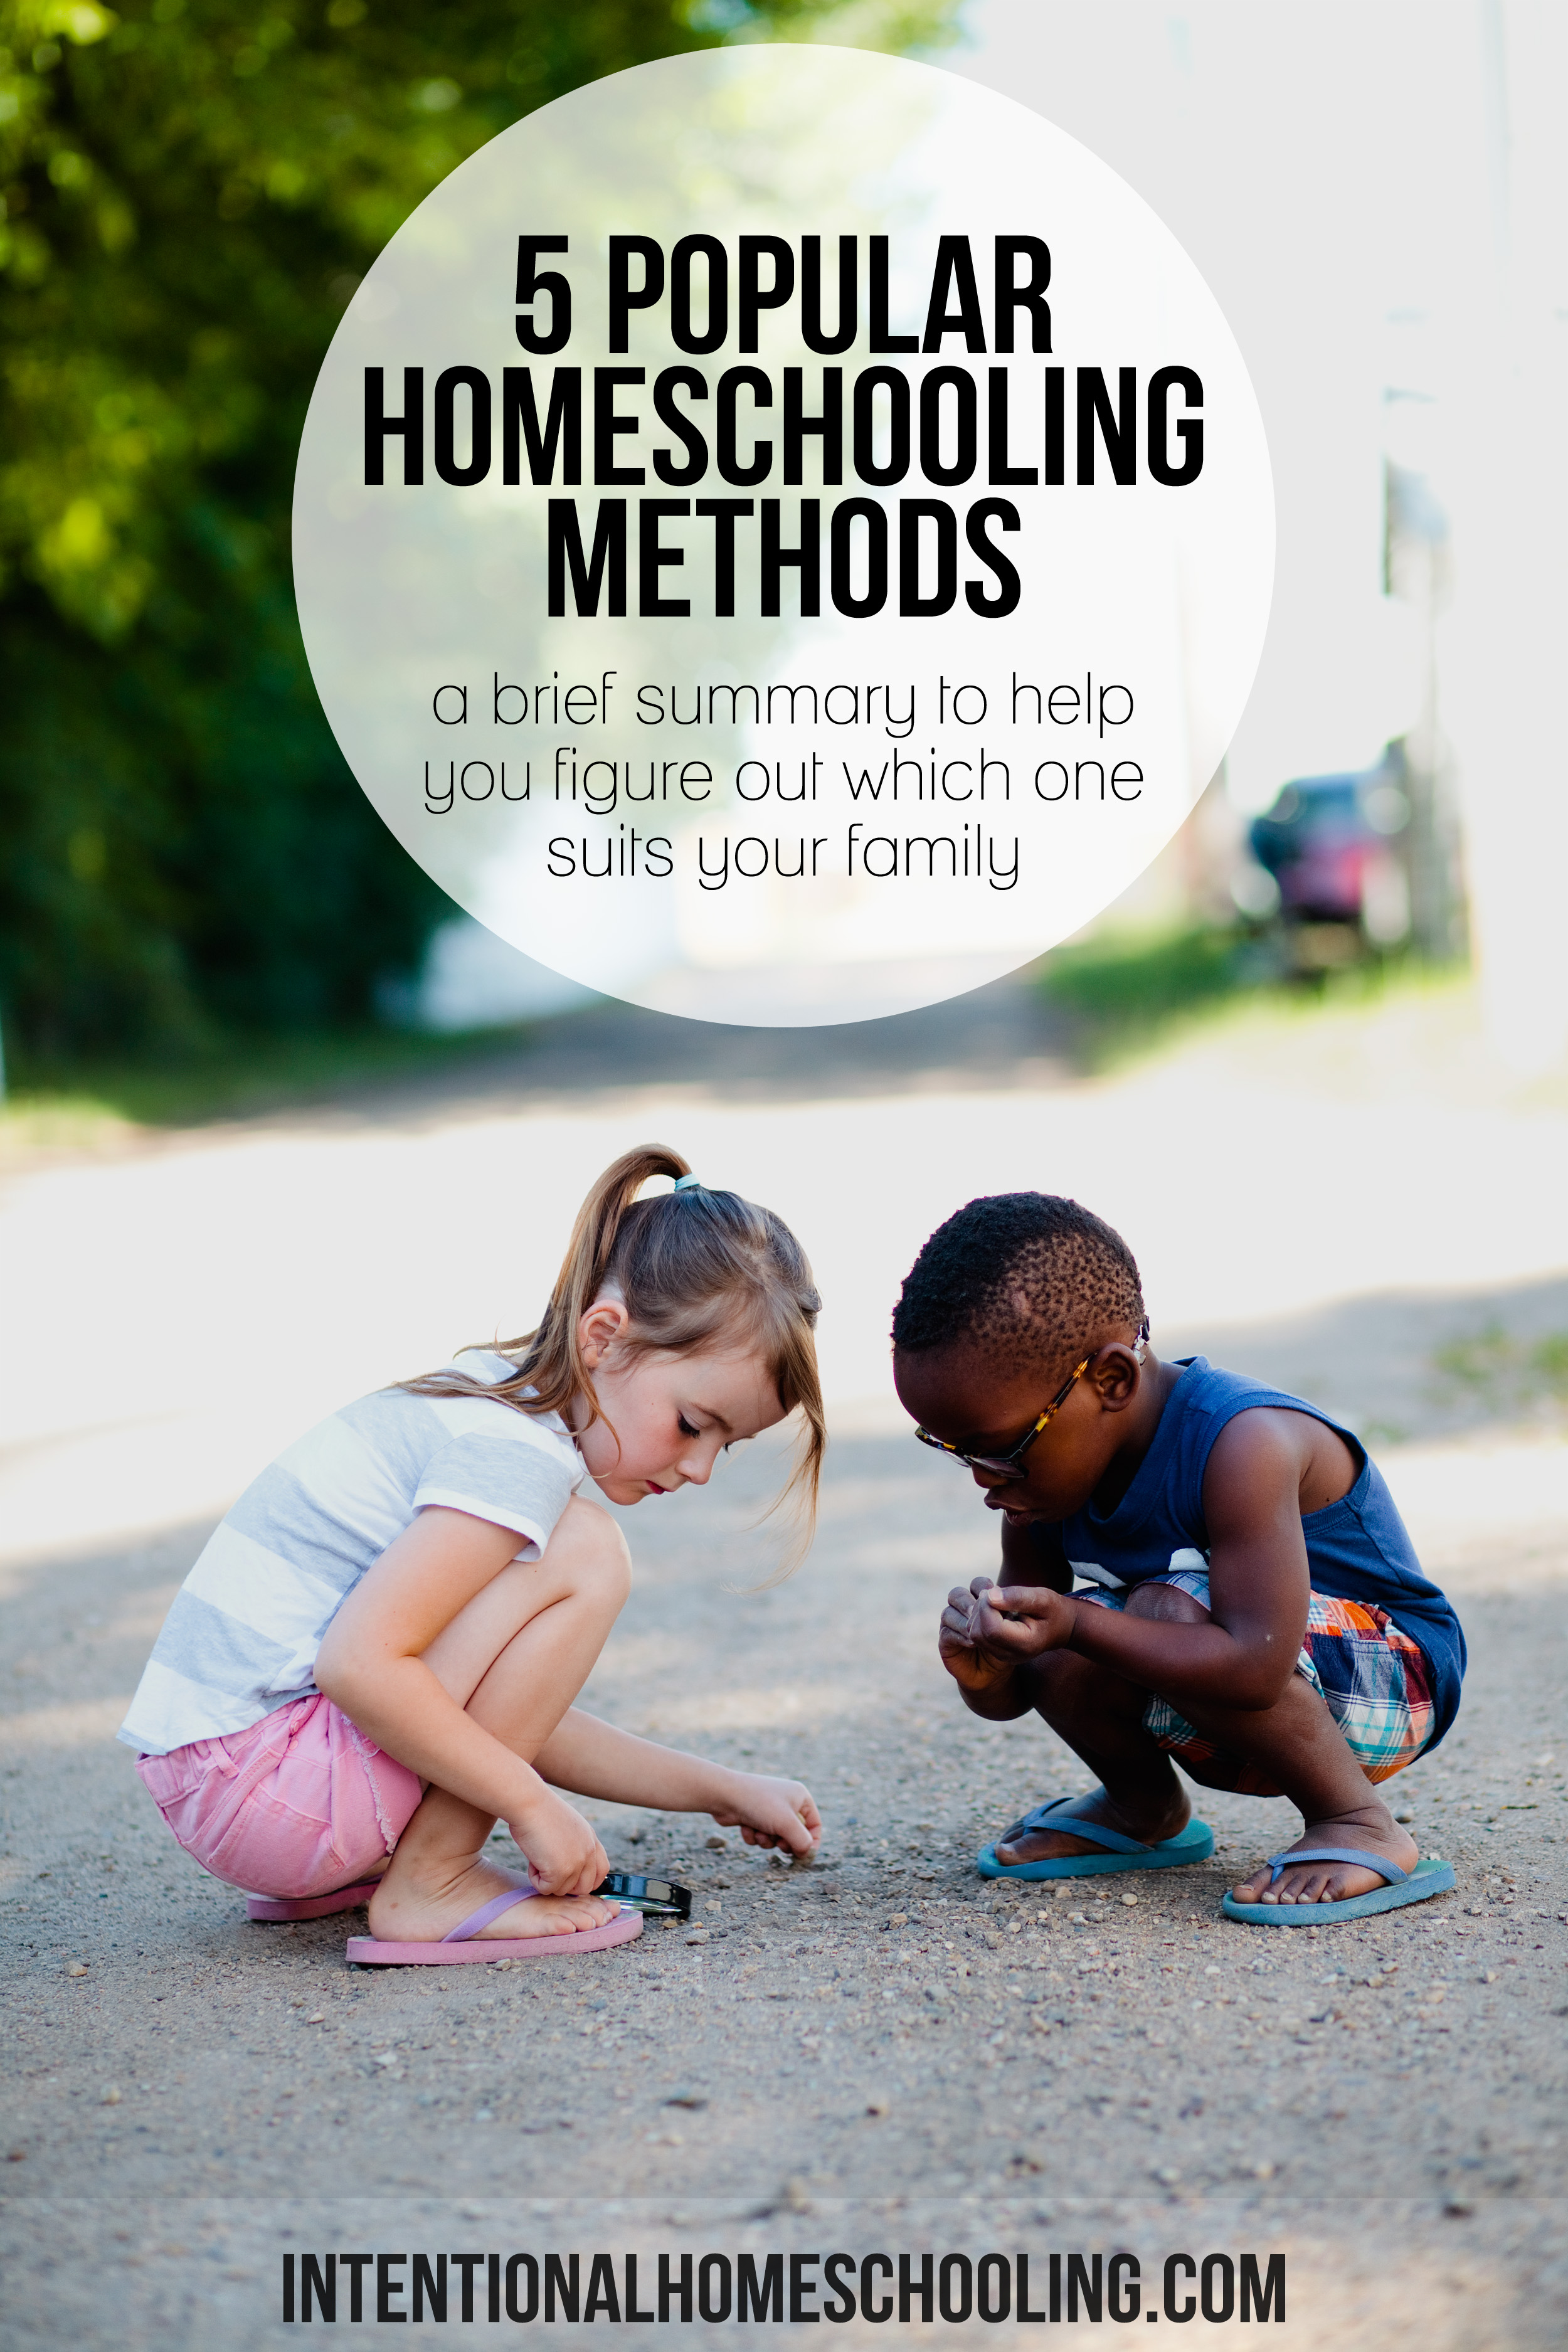 A quick summary of 5 of the most popular homeschooling methods to help you decide which one might be best for your family.